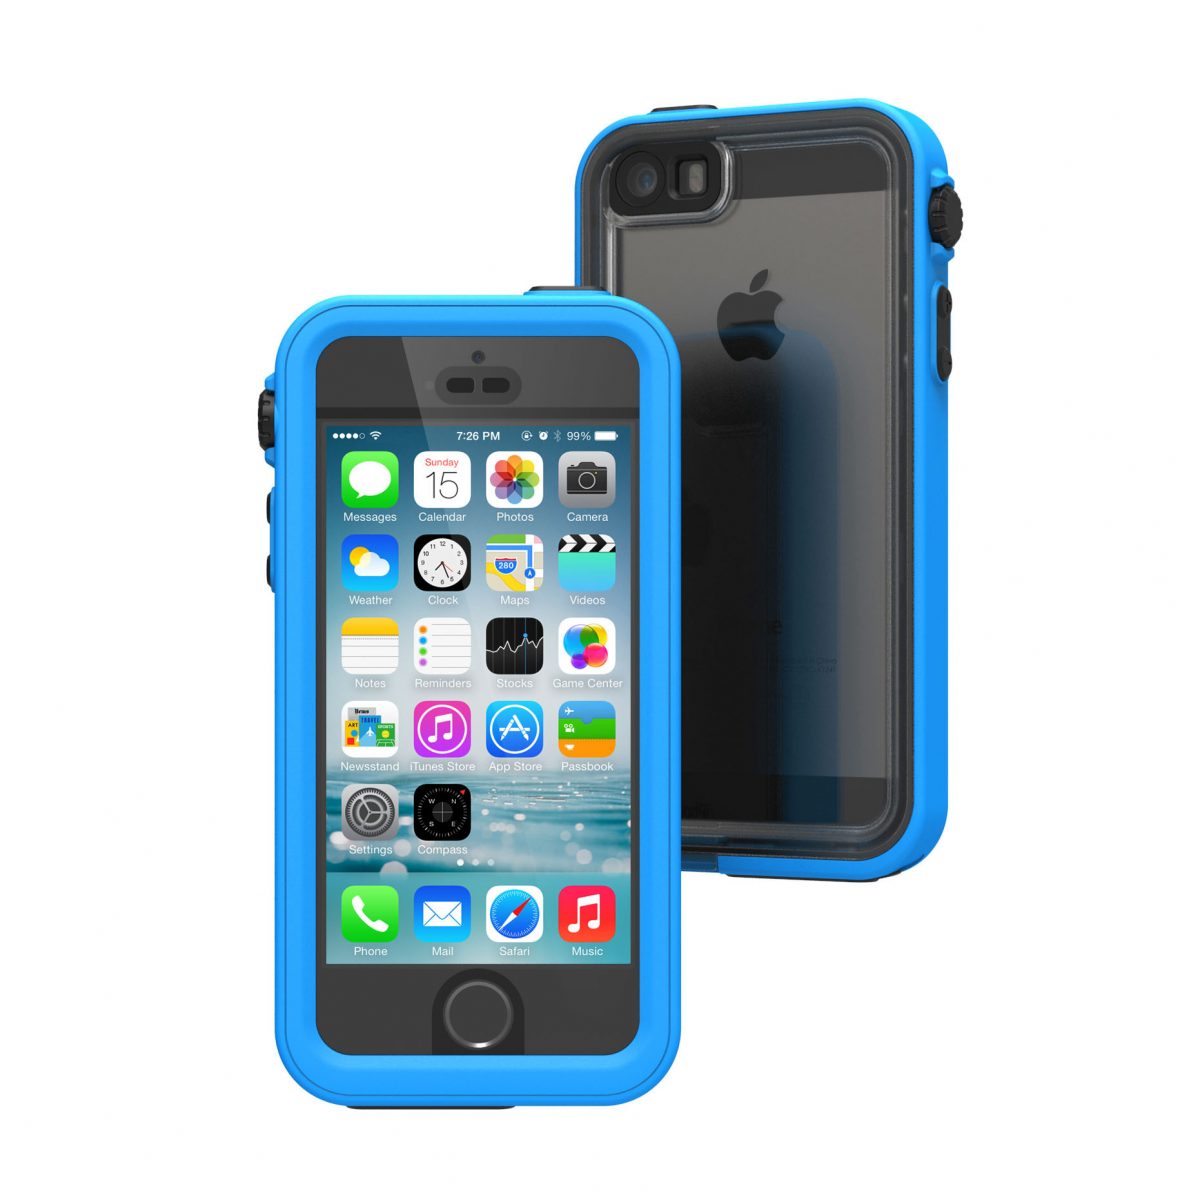 The Catalyst Case for iPhone 5/5s Should be your Waterproof Case